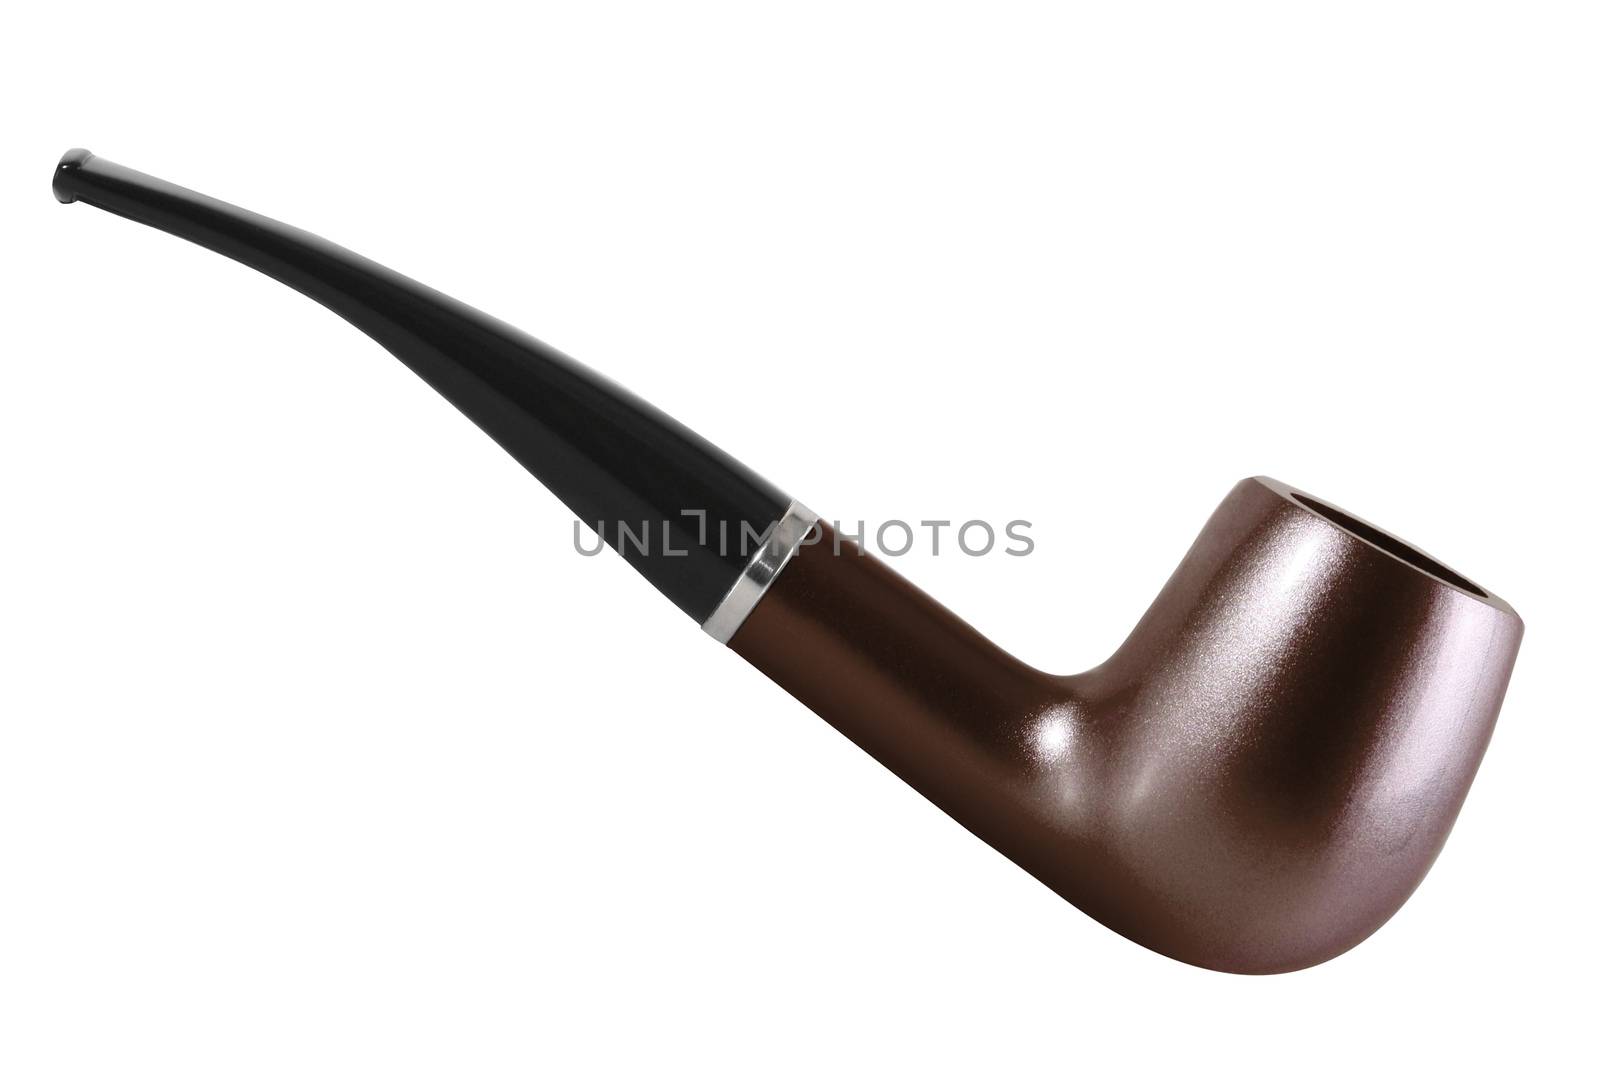 Tobacco pipe isolated on white